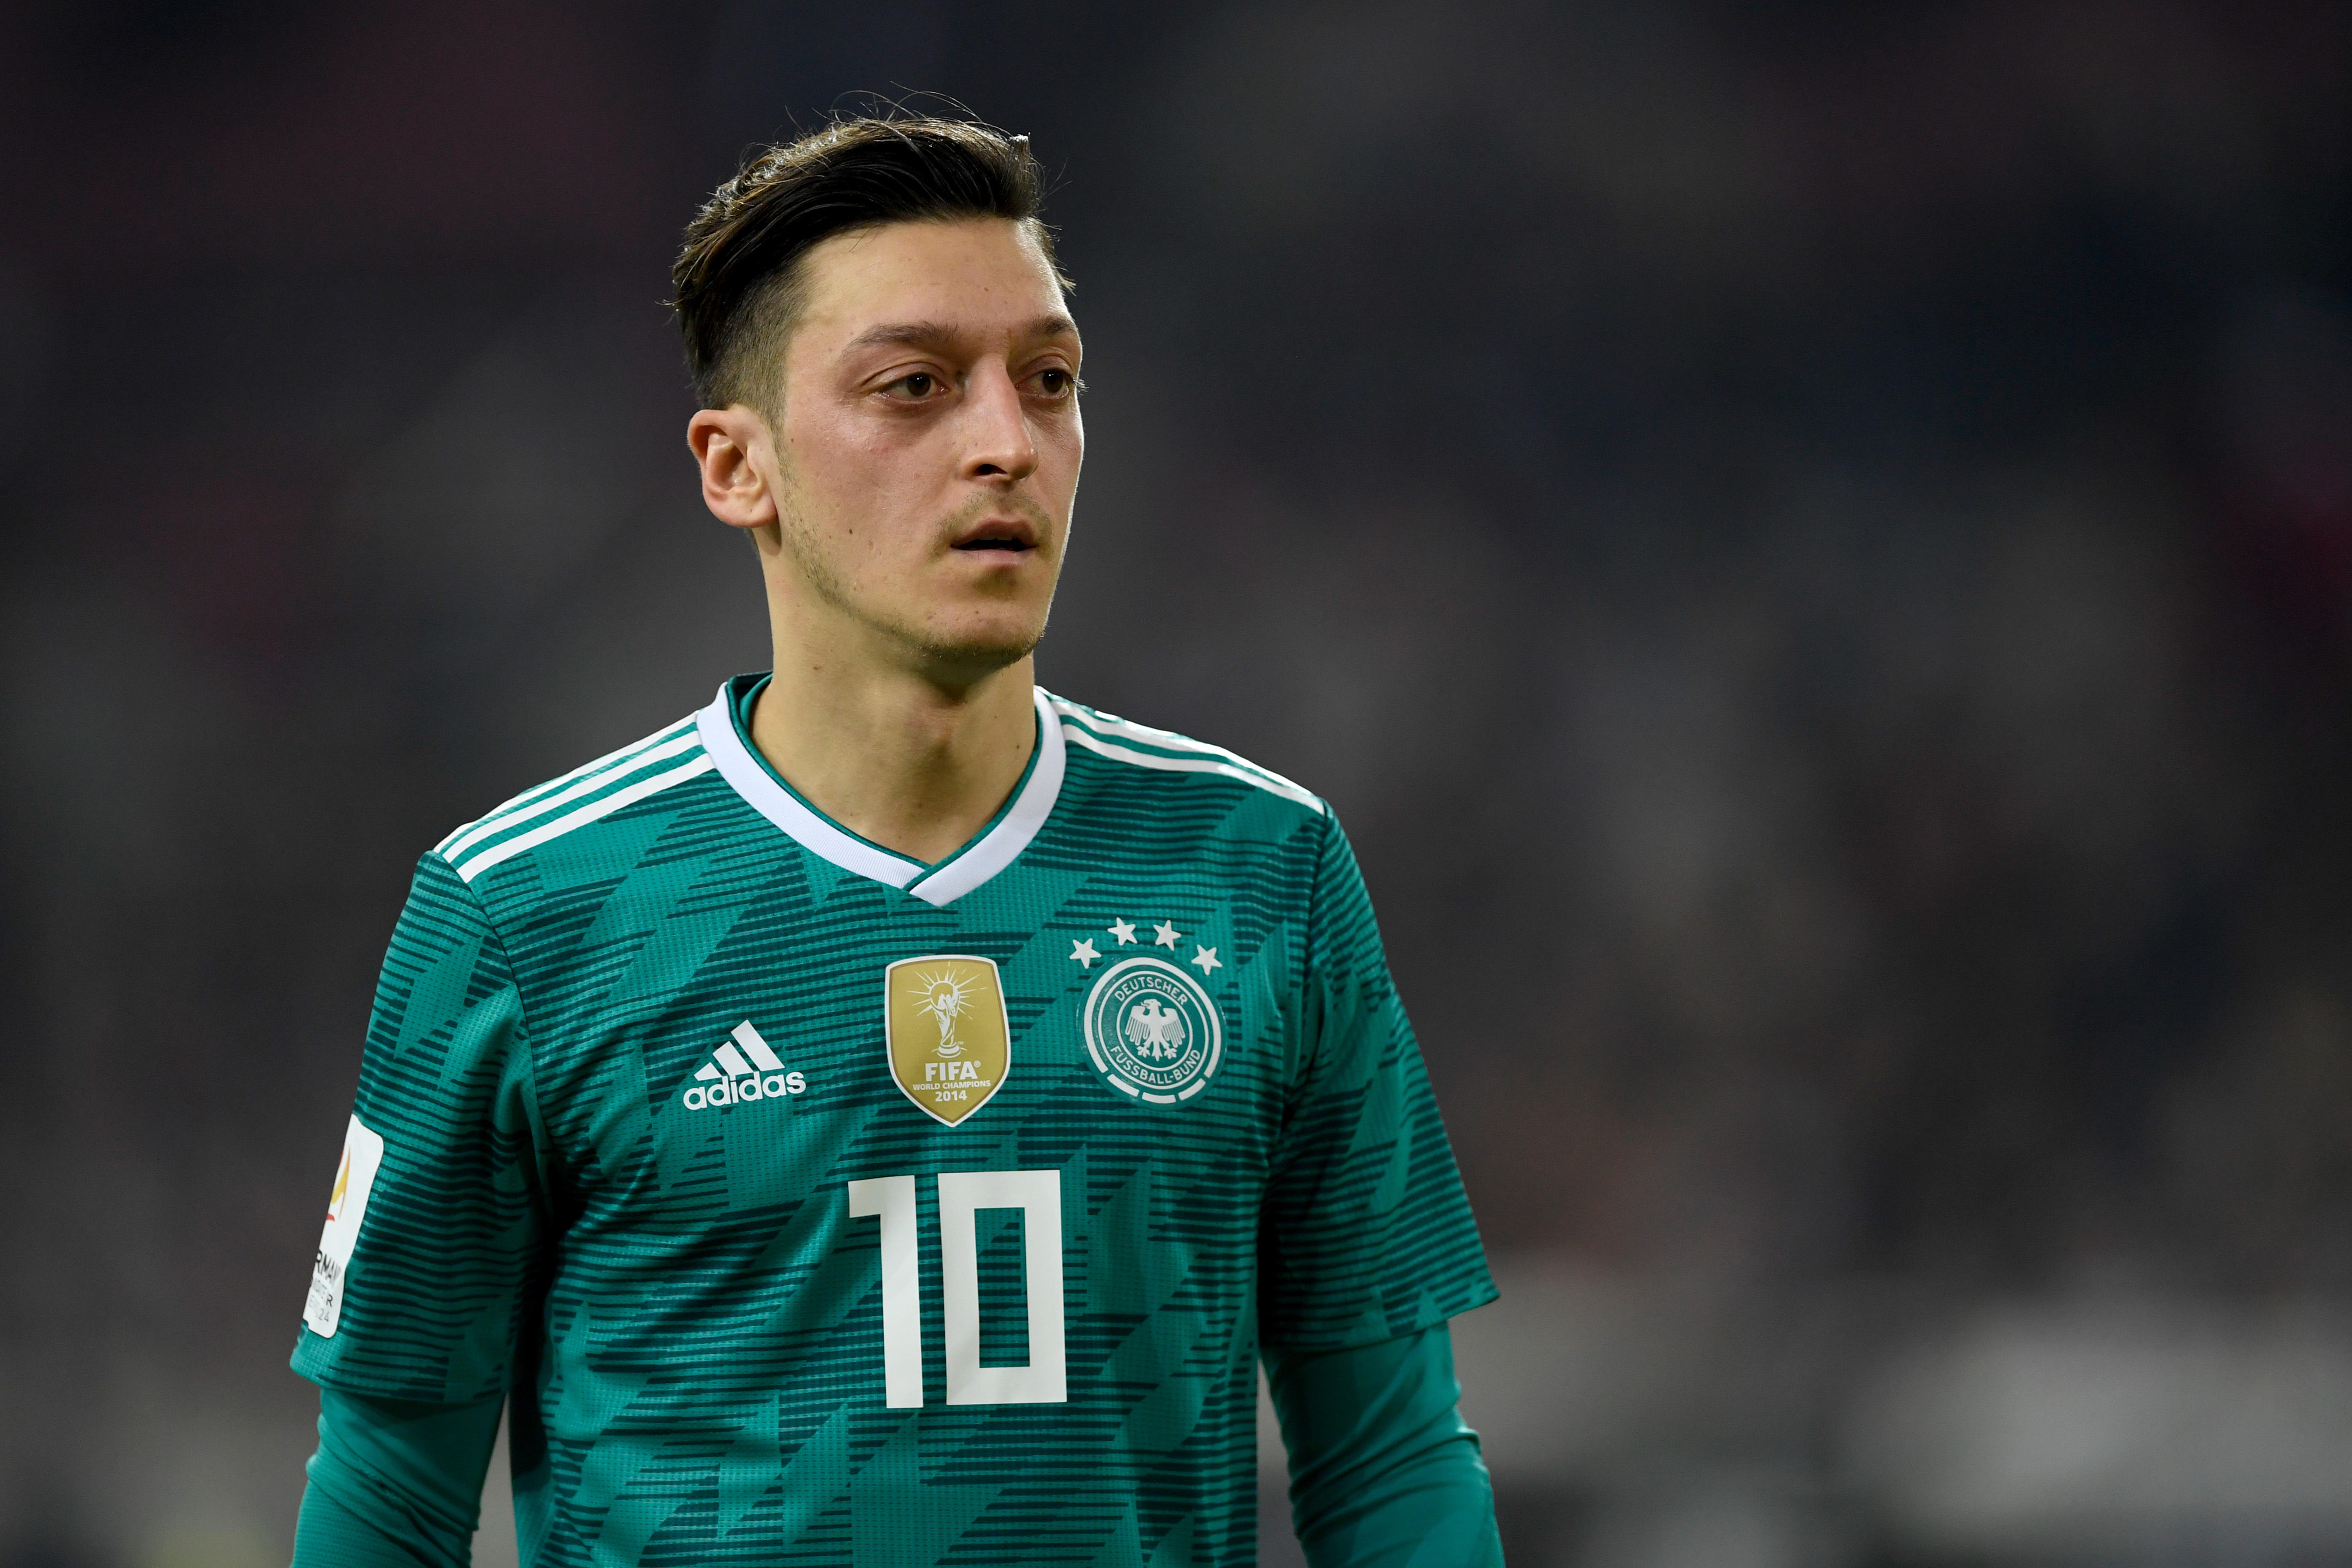 Ozil then & now: There is another 'Ozil' died in 1988